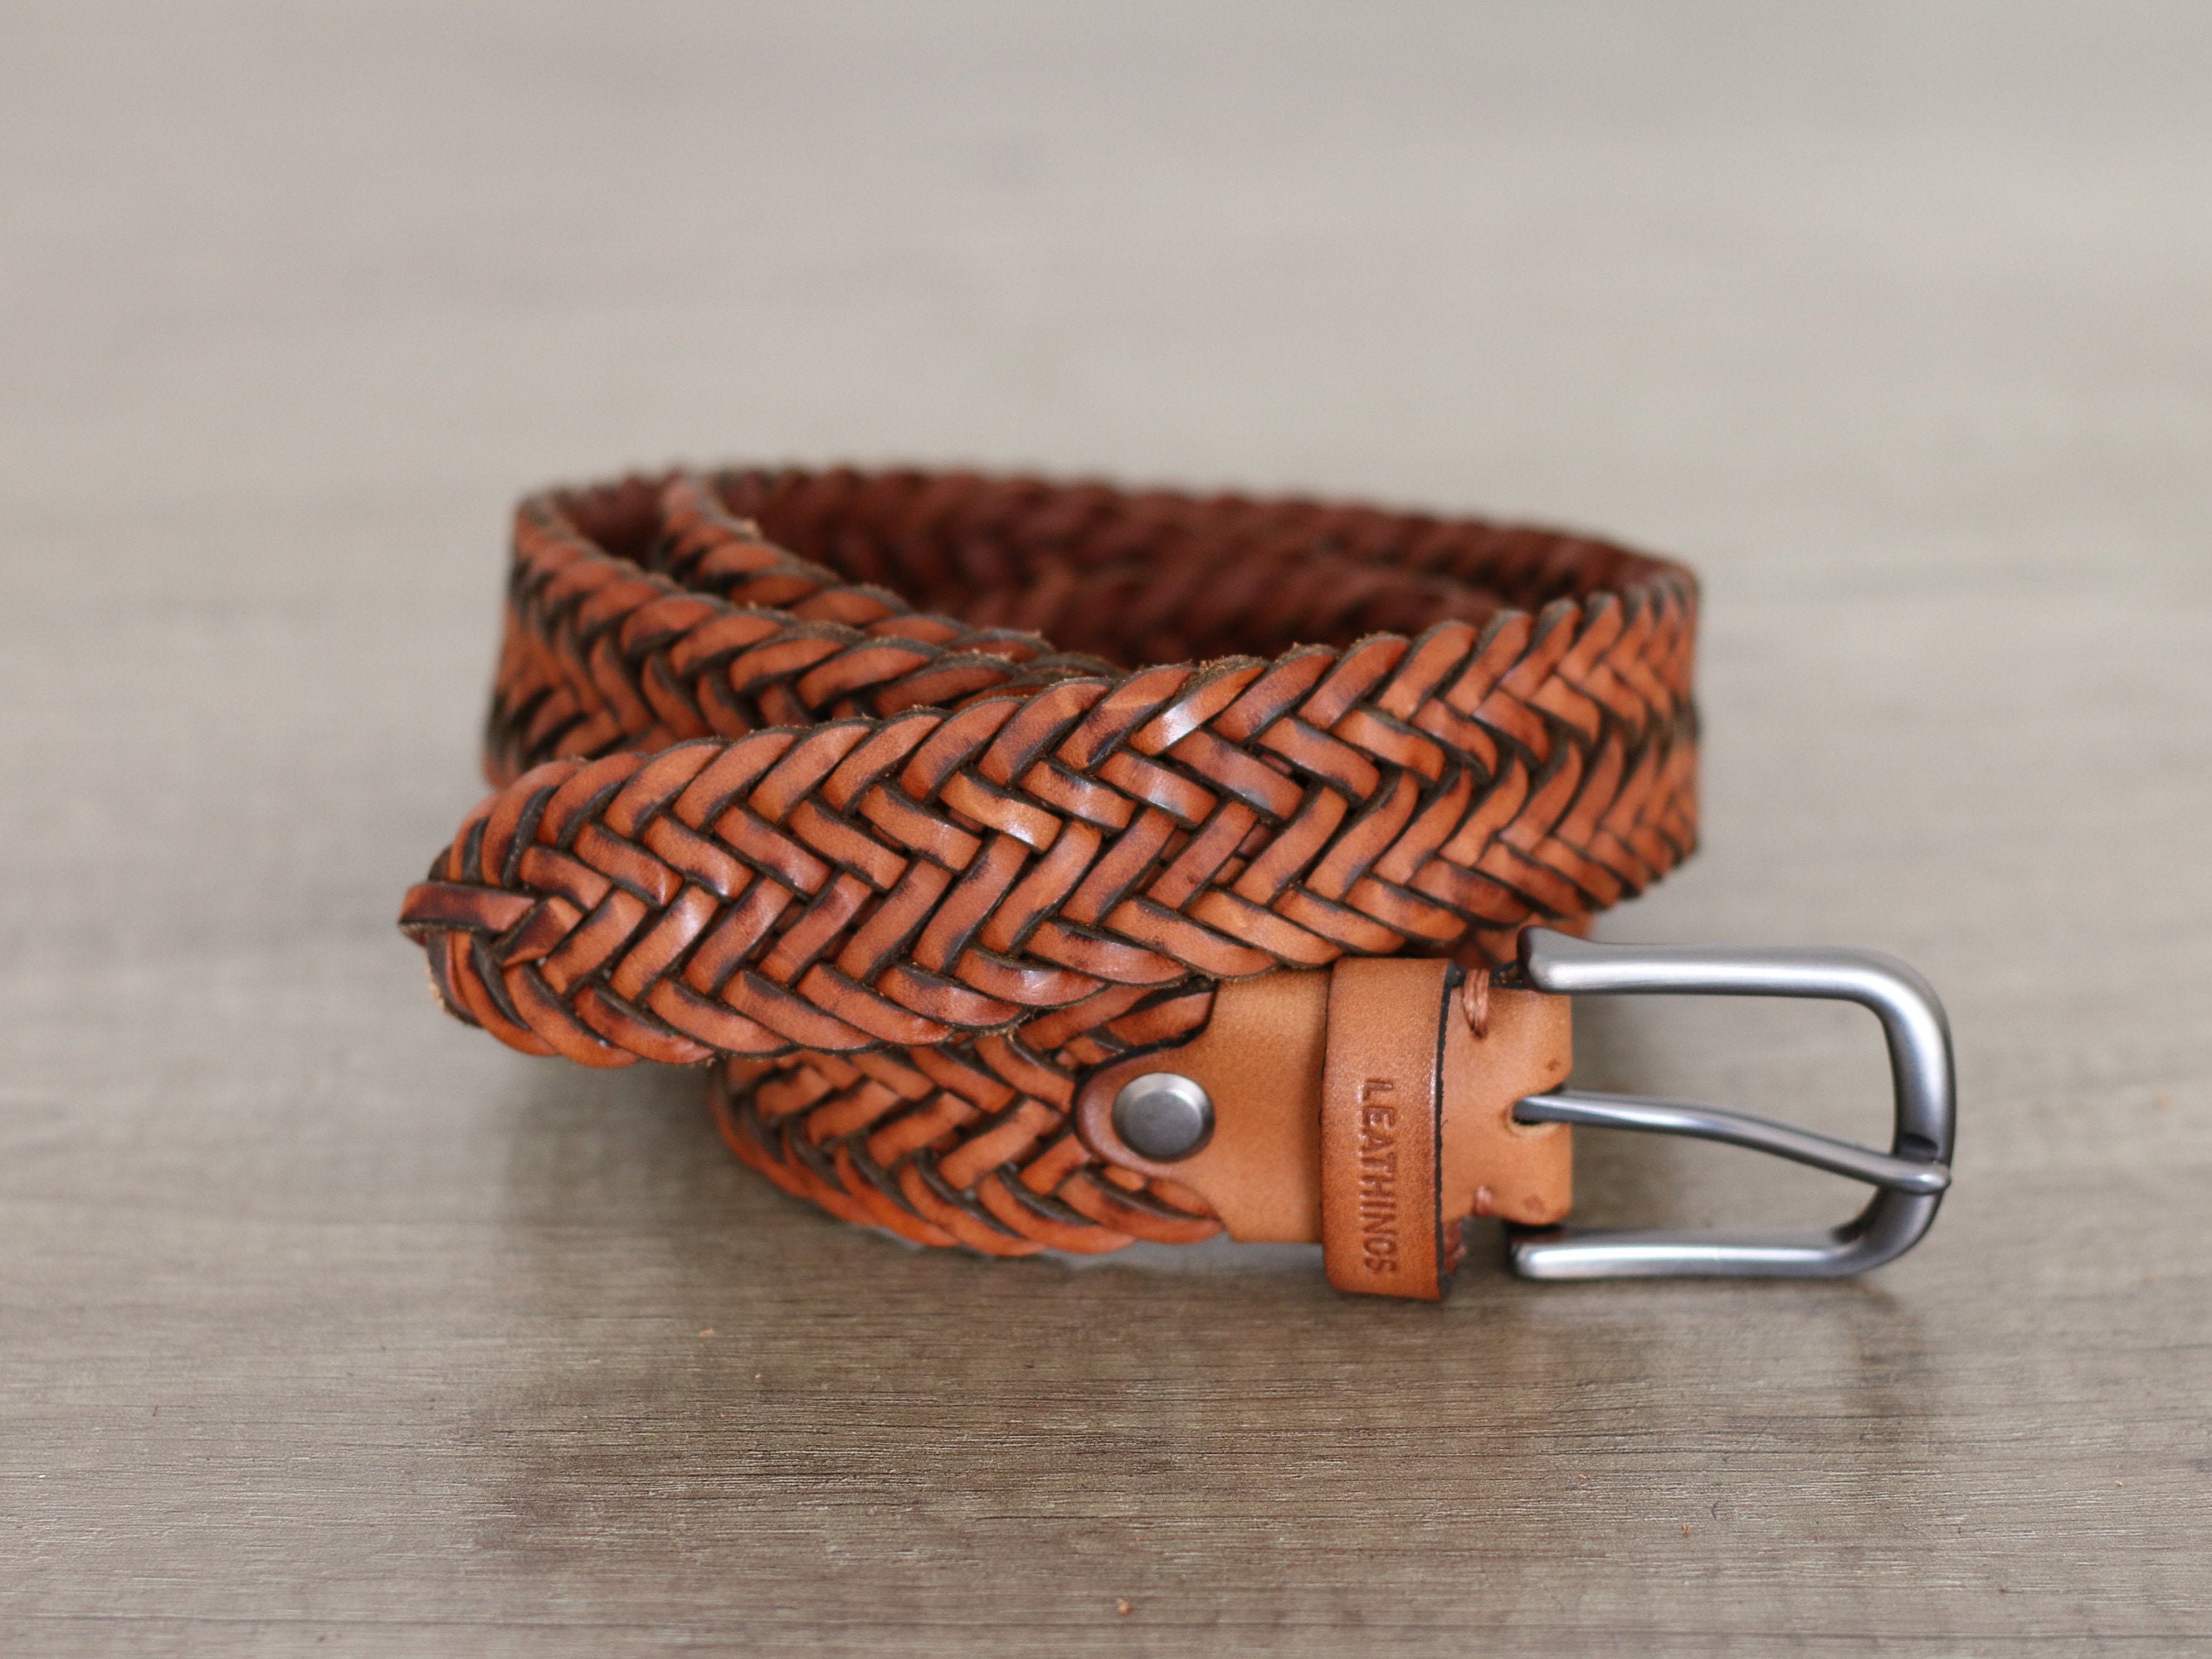 Braided Tan Leather Belt Handcrafted Vegetabled Leather Belts for Men and  Women Gift Ideas Elegant Belts Hand Weaving Leather Accessories 